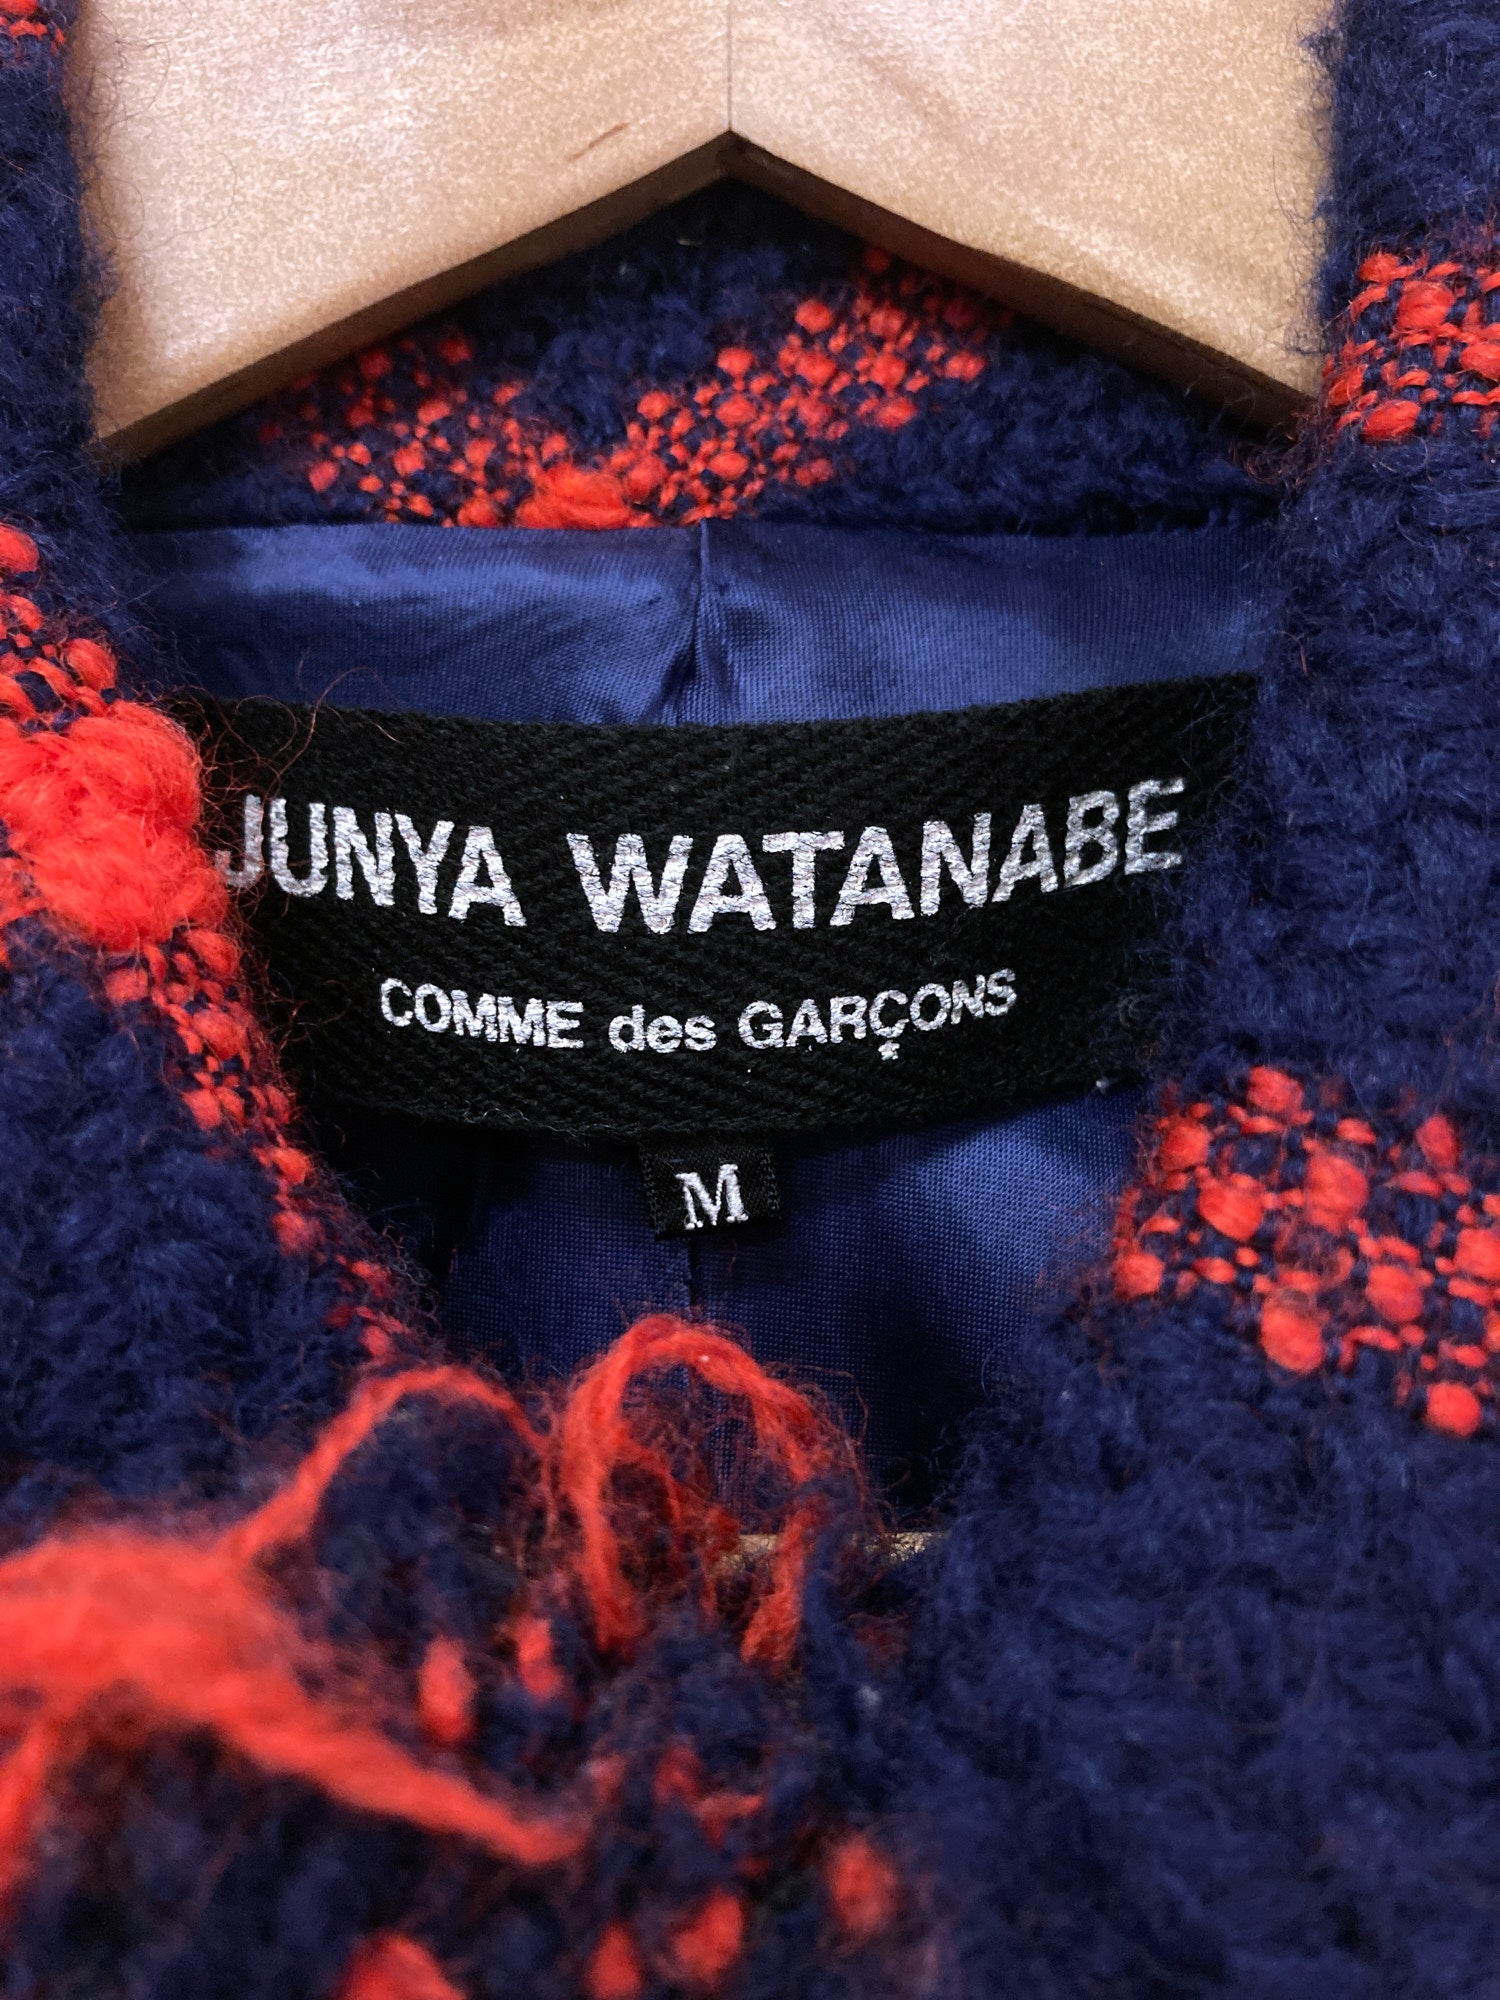 Junya Watanabe Comme des Garcons AW2001 navy red diagonal check wool coat - M S